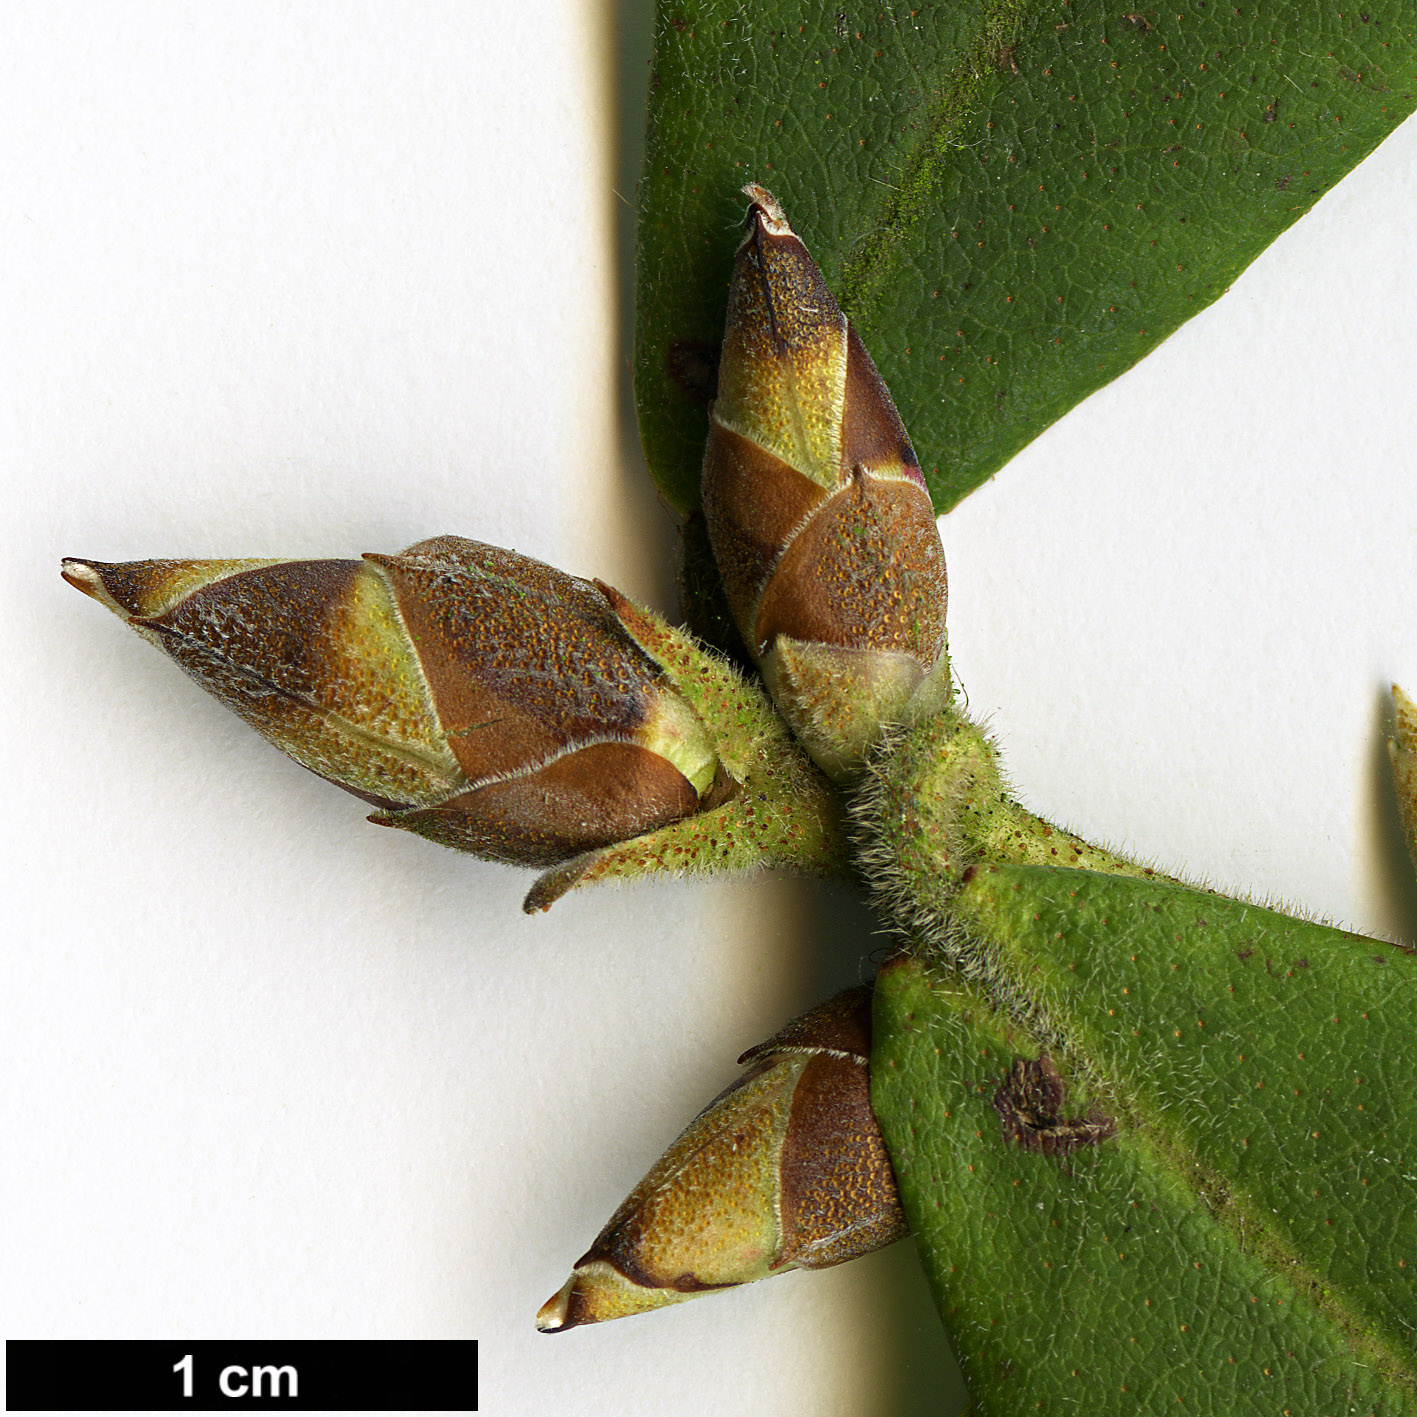 High resolution image: Family: Ericaceae - Genus: Rhododendron - Taxon: augustinii